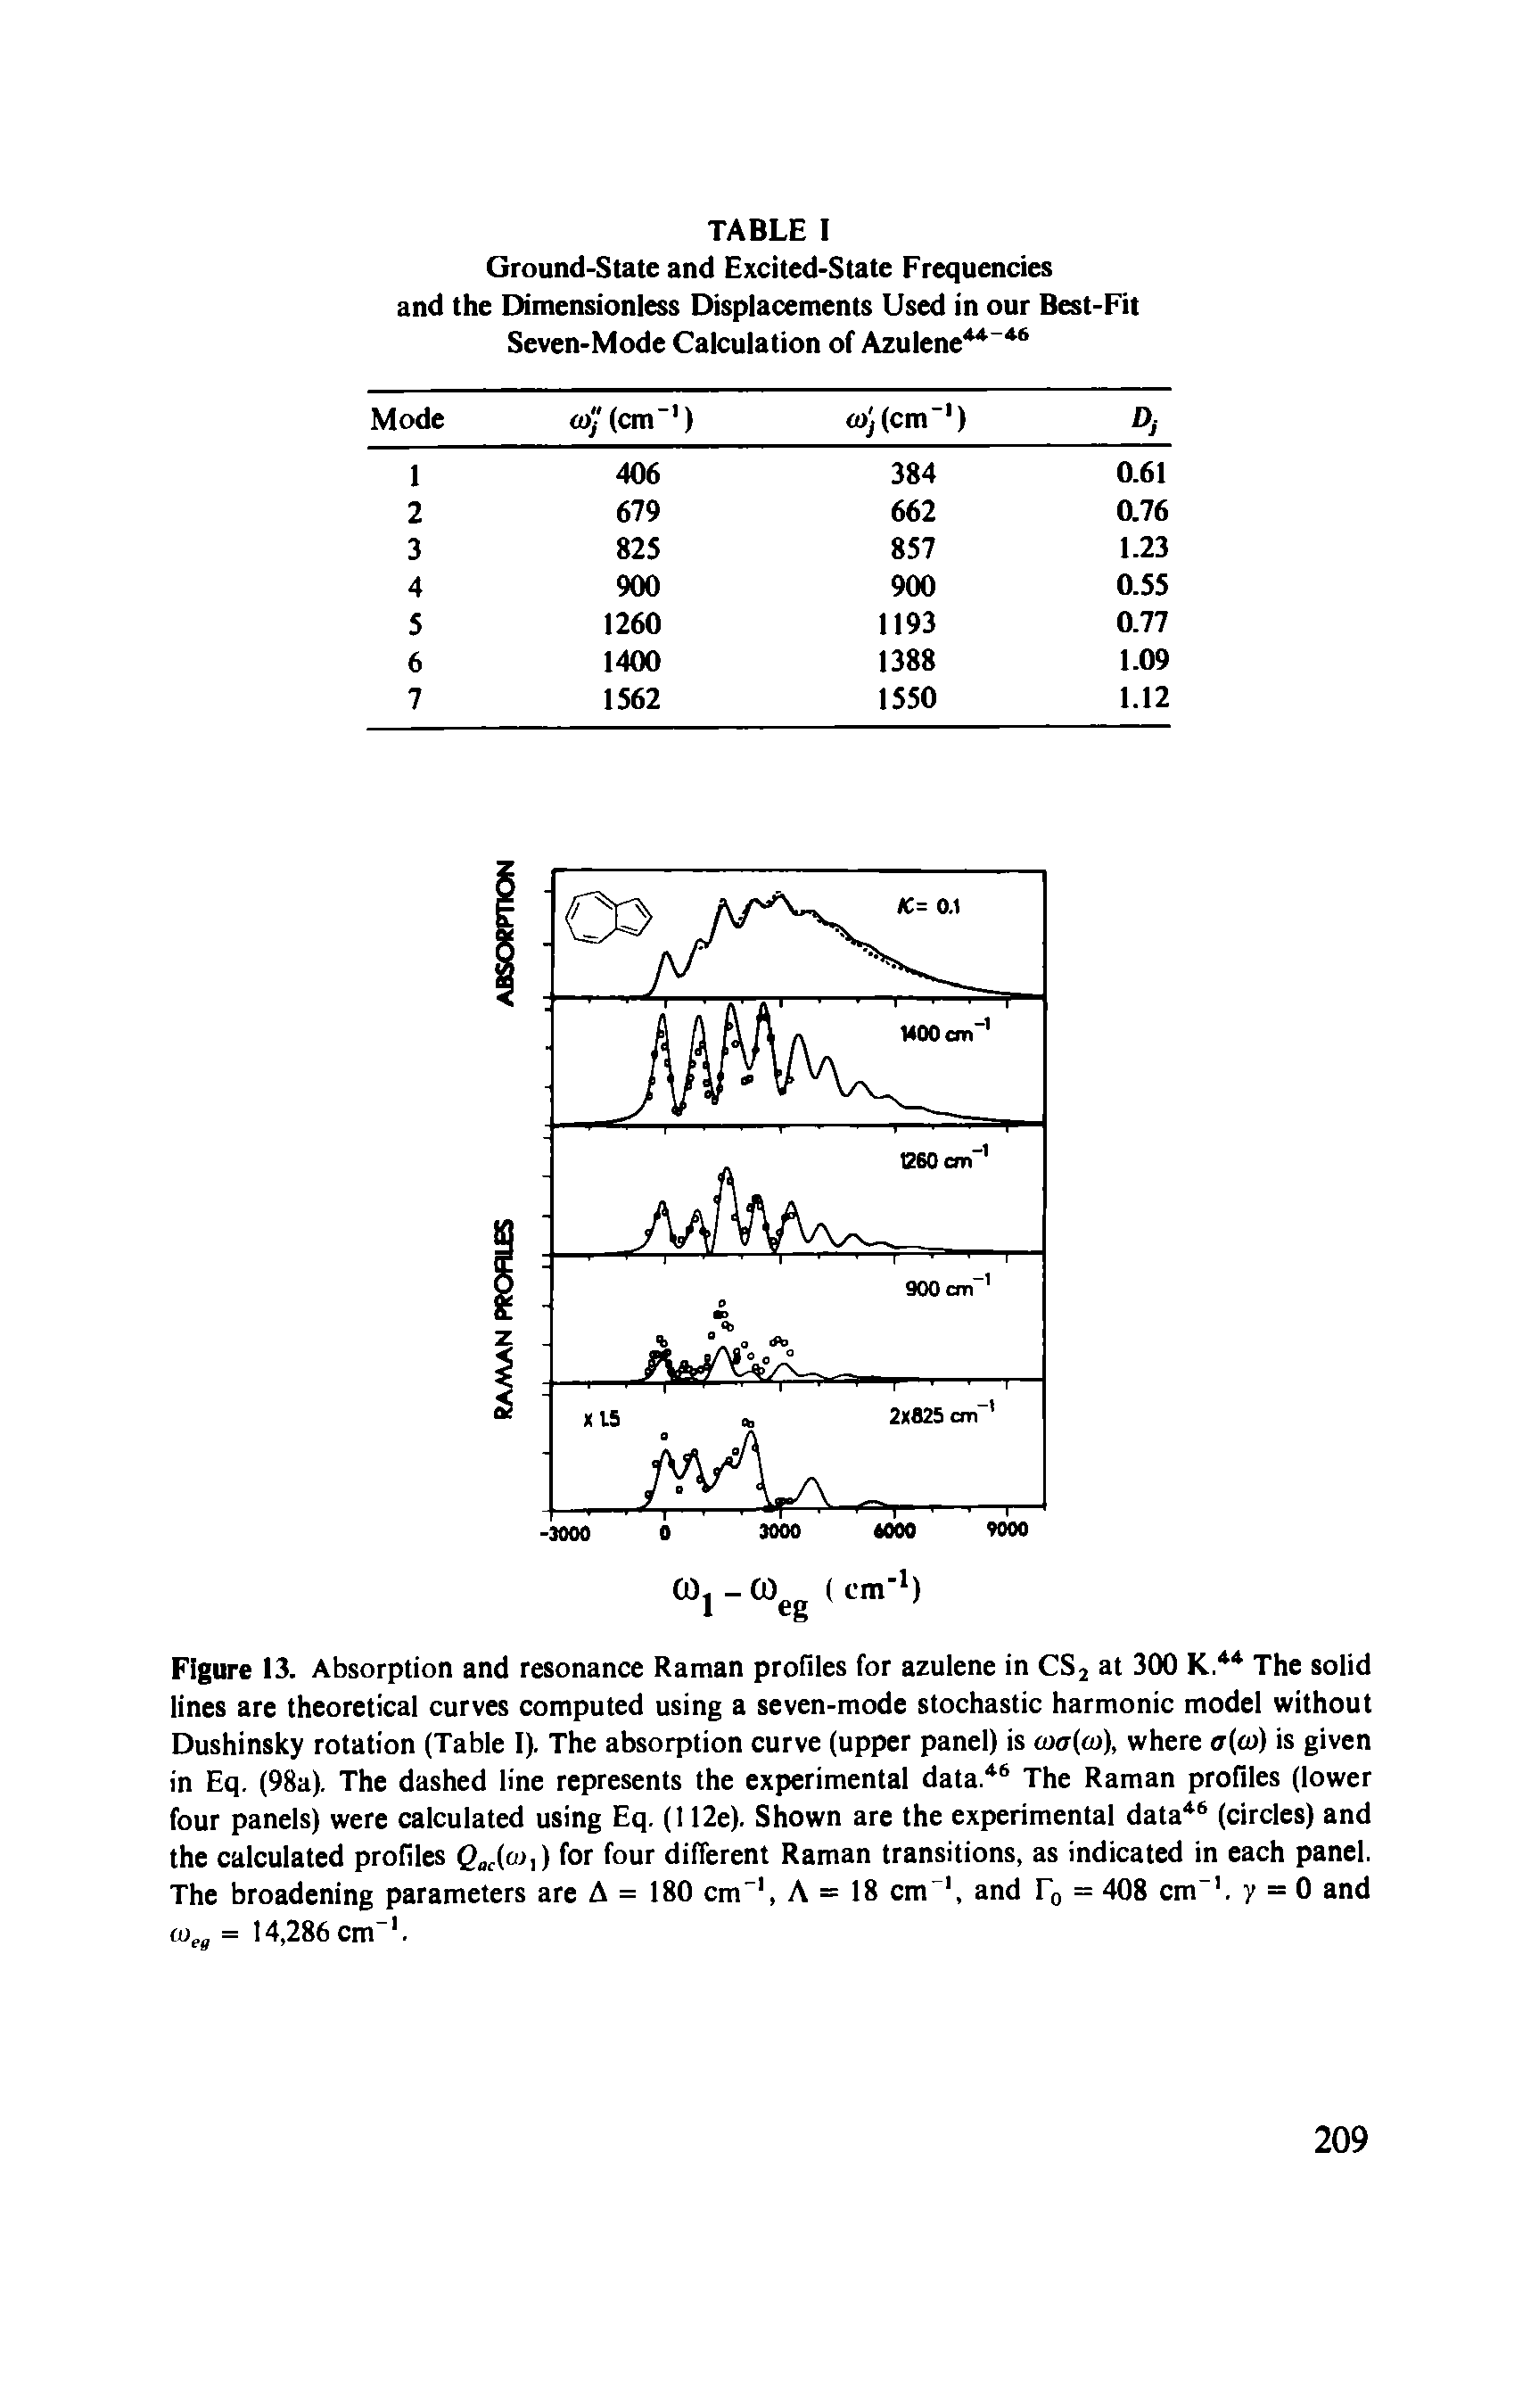 Figure 13. Absorption and resonance Raman profiles for azulene in CS2 at 300 K 44 The solid lines are theoretical curves computed using a seven-mode stochastic harmonic model without Dushinsky rotation (Table I). The absorption curve (upper panel) is co<r(co), where a(co) is given in Eq. (98a). The dashed line represents the experimental data 46 The Raman profiles (lower four panels) were calculated using Eq. (112e). Shown are the experimental data46 (circles) and the calculated profiles Qac(°h) for four different Raman transitions, as indicated in each panel. The broadening parameters are A = 180 cm-1, A = 18 cm and T0 = 408 cm-1, y = 0 and weg = 14,286 cm-1.